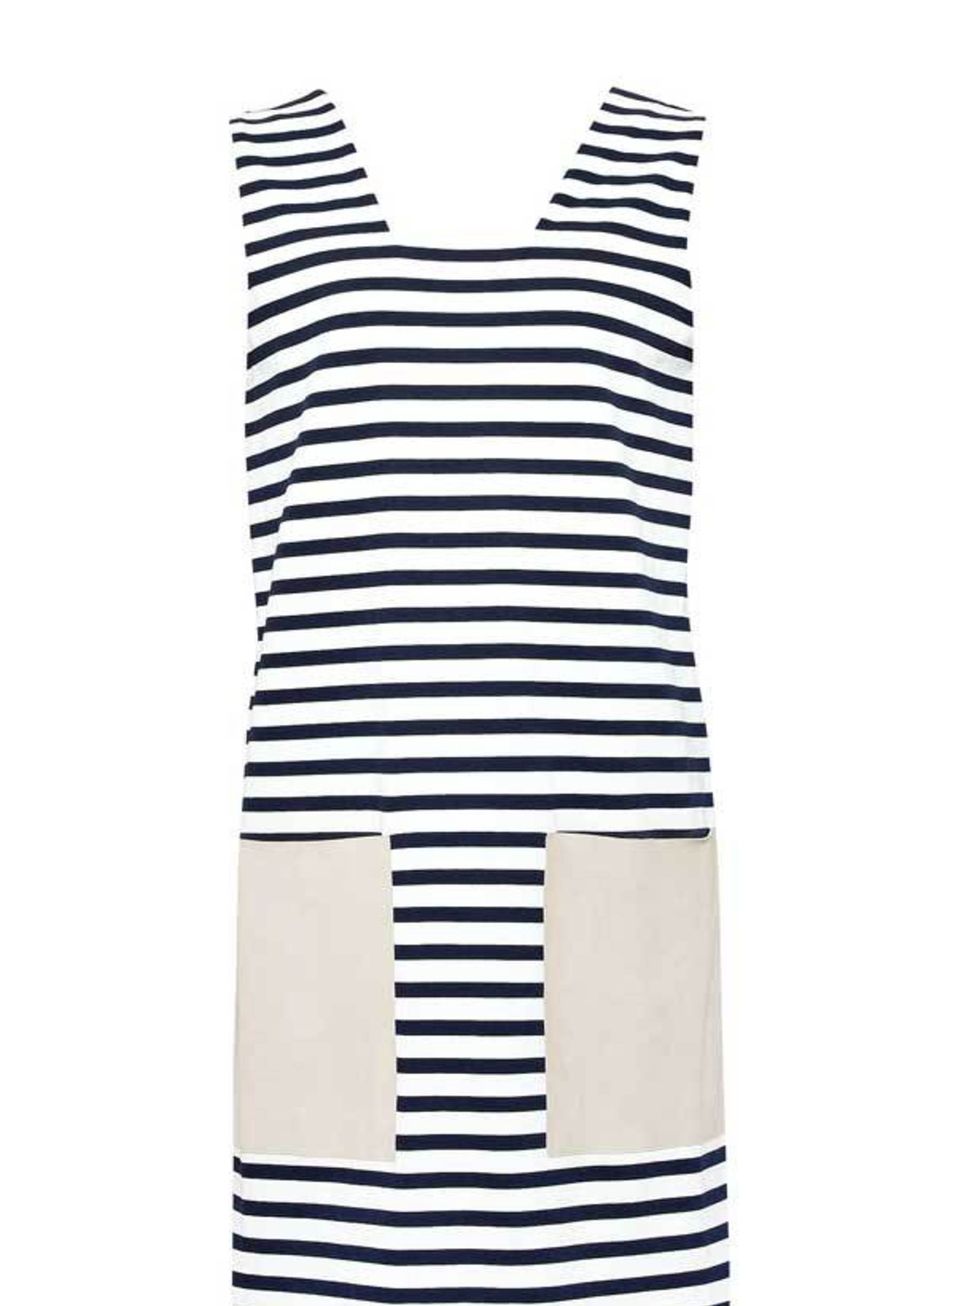 <p>COS adds its quirky Swedish design to a classic Breton stripe and creates an instantly covetable dress that youll wear all summer long <a href="http://www.cosstores.com/gb/site/home__start.nhtml">COS</a> leather pocket stripe dress, £55</p>